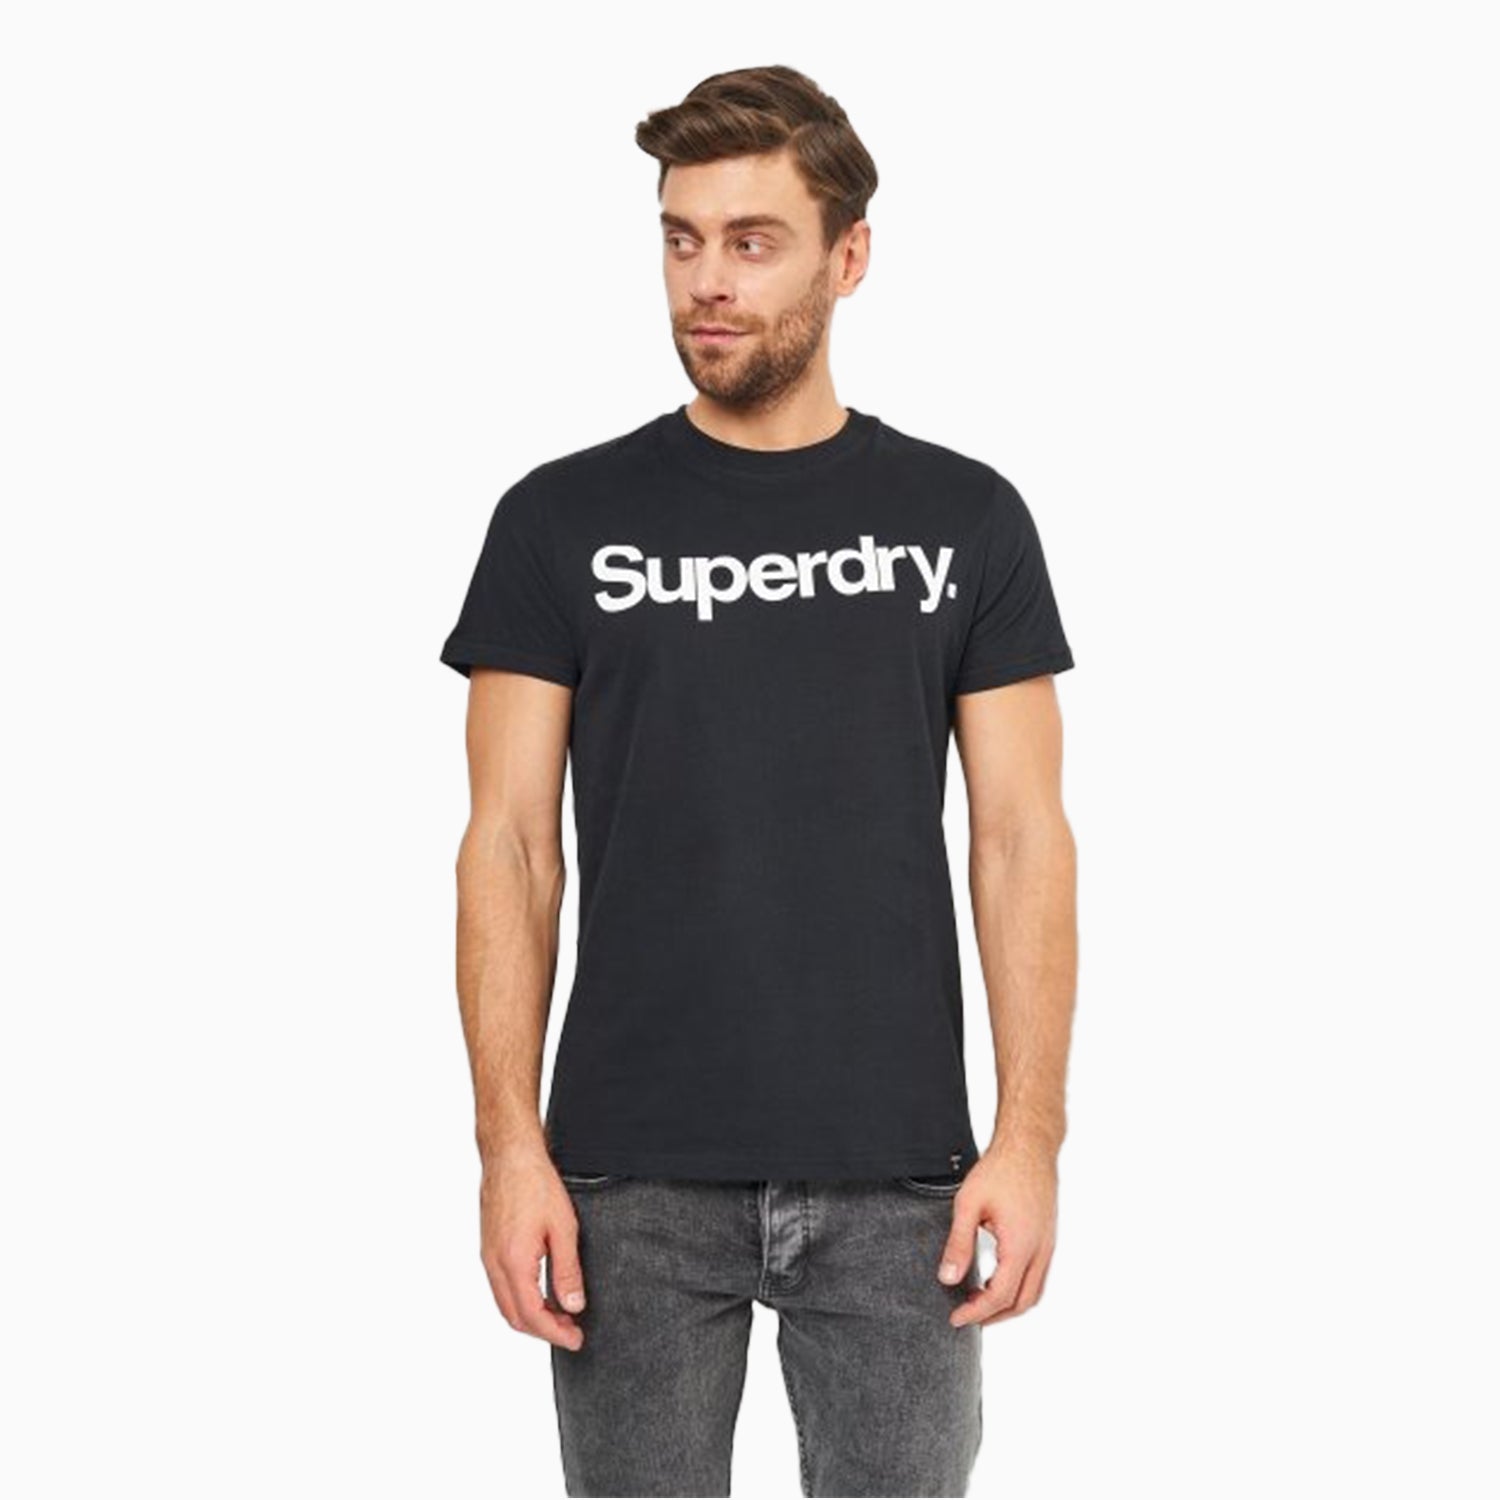 Superdry Men's Crew Neck Short Sleeve T Shirt - Color: Black - Tops and Bottoms USA -